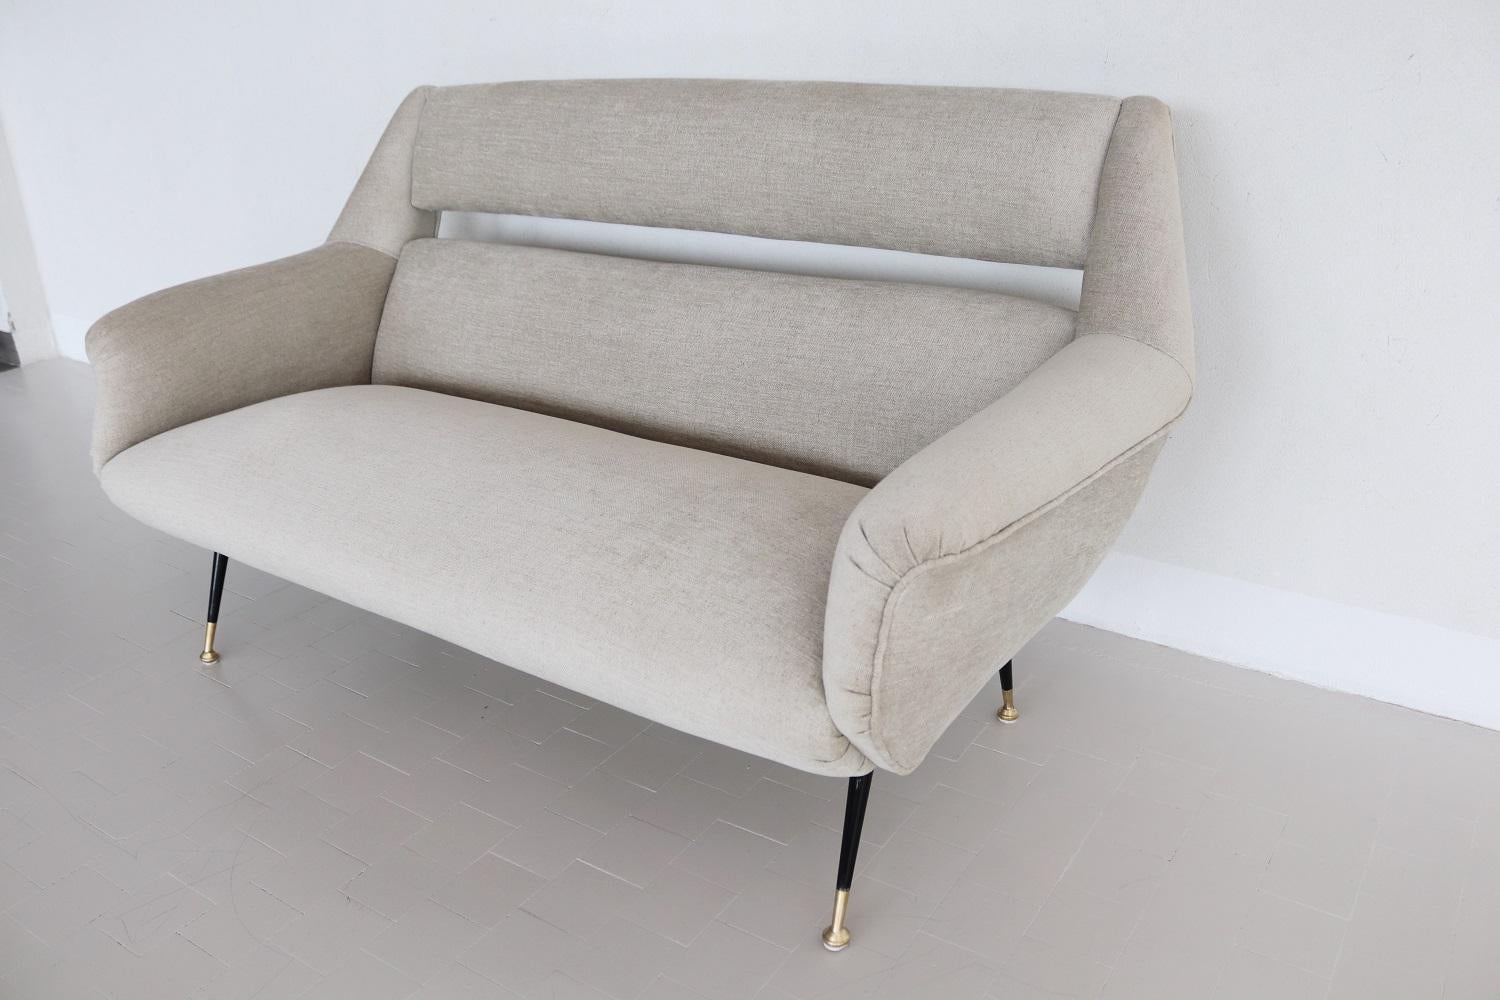 Magnificent midcentury sofa manufactured in the 1950s in Italy.
The design of the sofa is very much in the style of Carlo de Carli.
The sofa have been completely re-upholstered with soft chenille fabric in sand-white color and internally